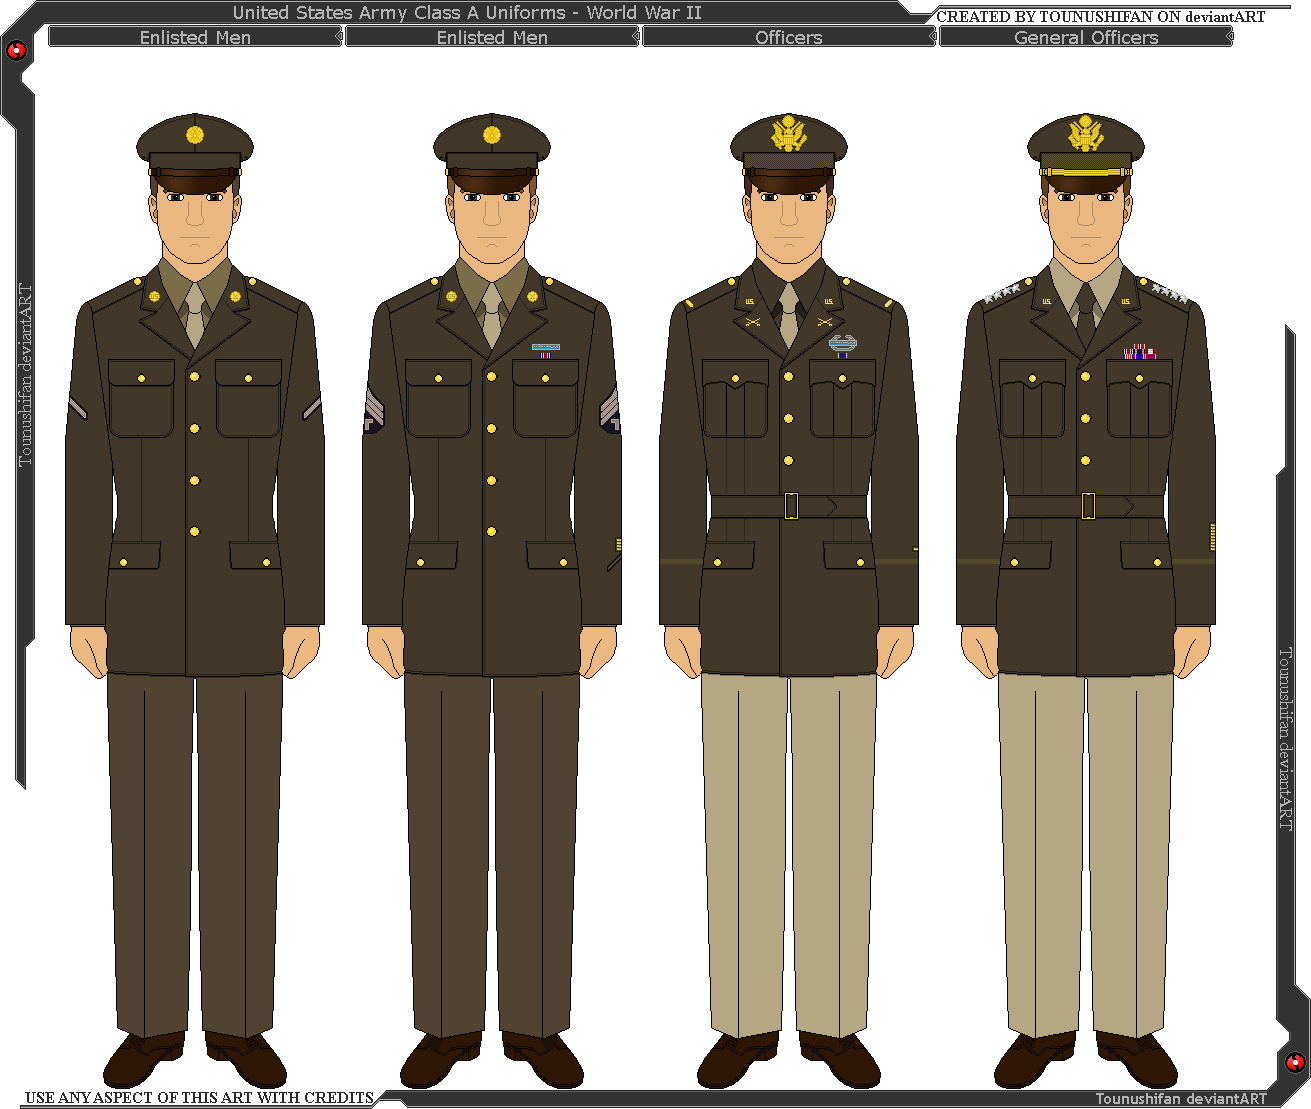 Wwii U.S. Army Class A Uniform By Grand-Lobster-King On Deviantart